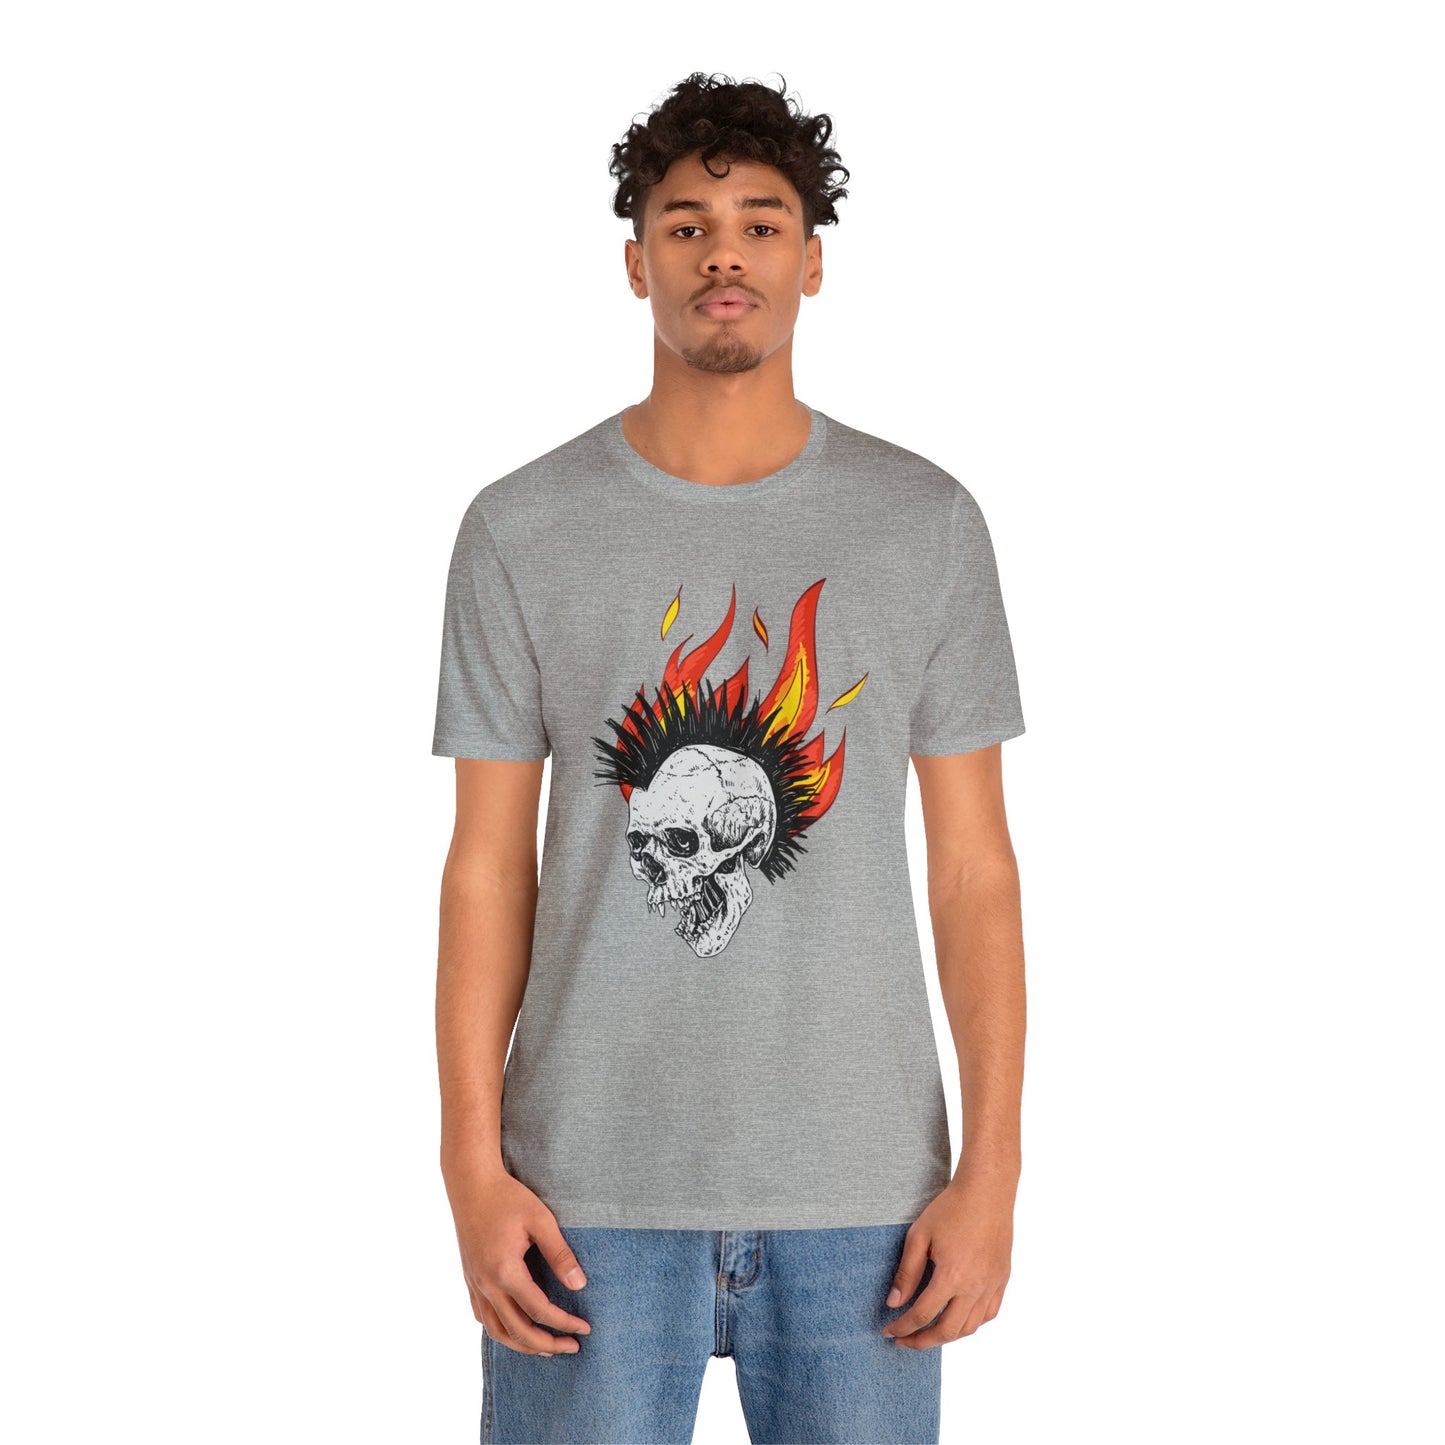 Flaming Skull With Mohawk - Graphic T Shirt